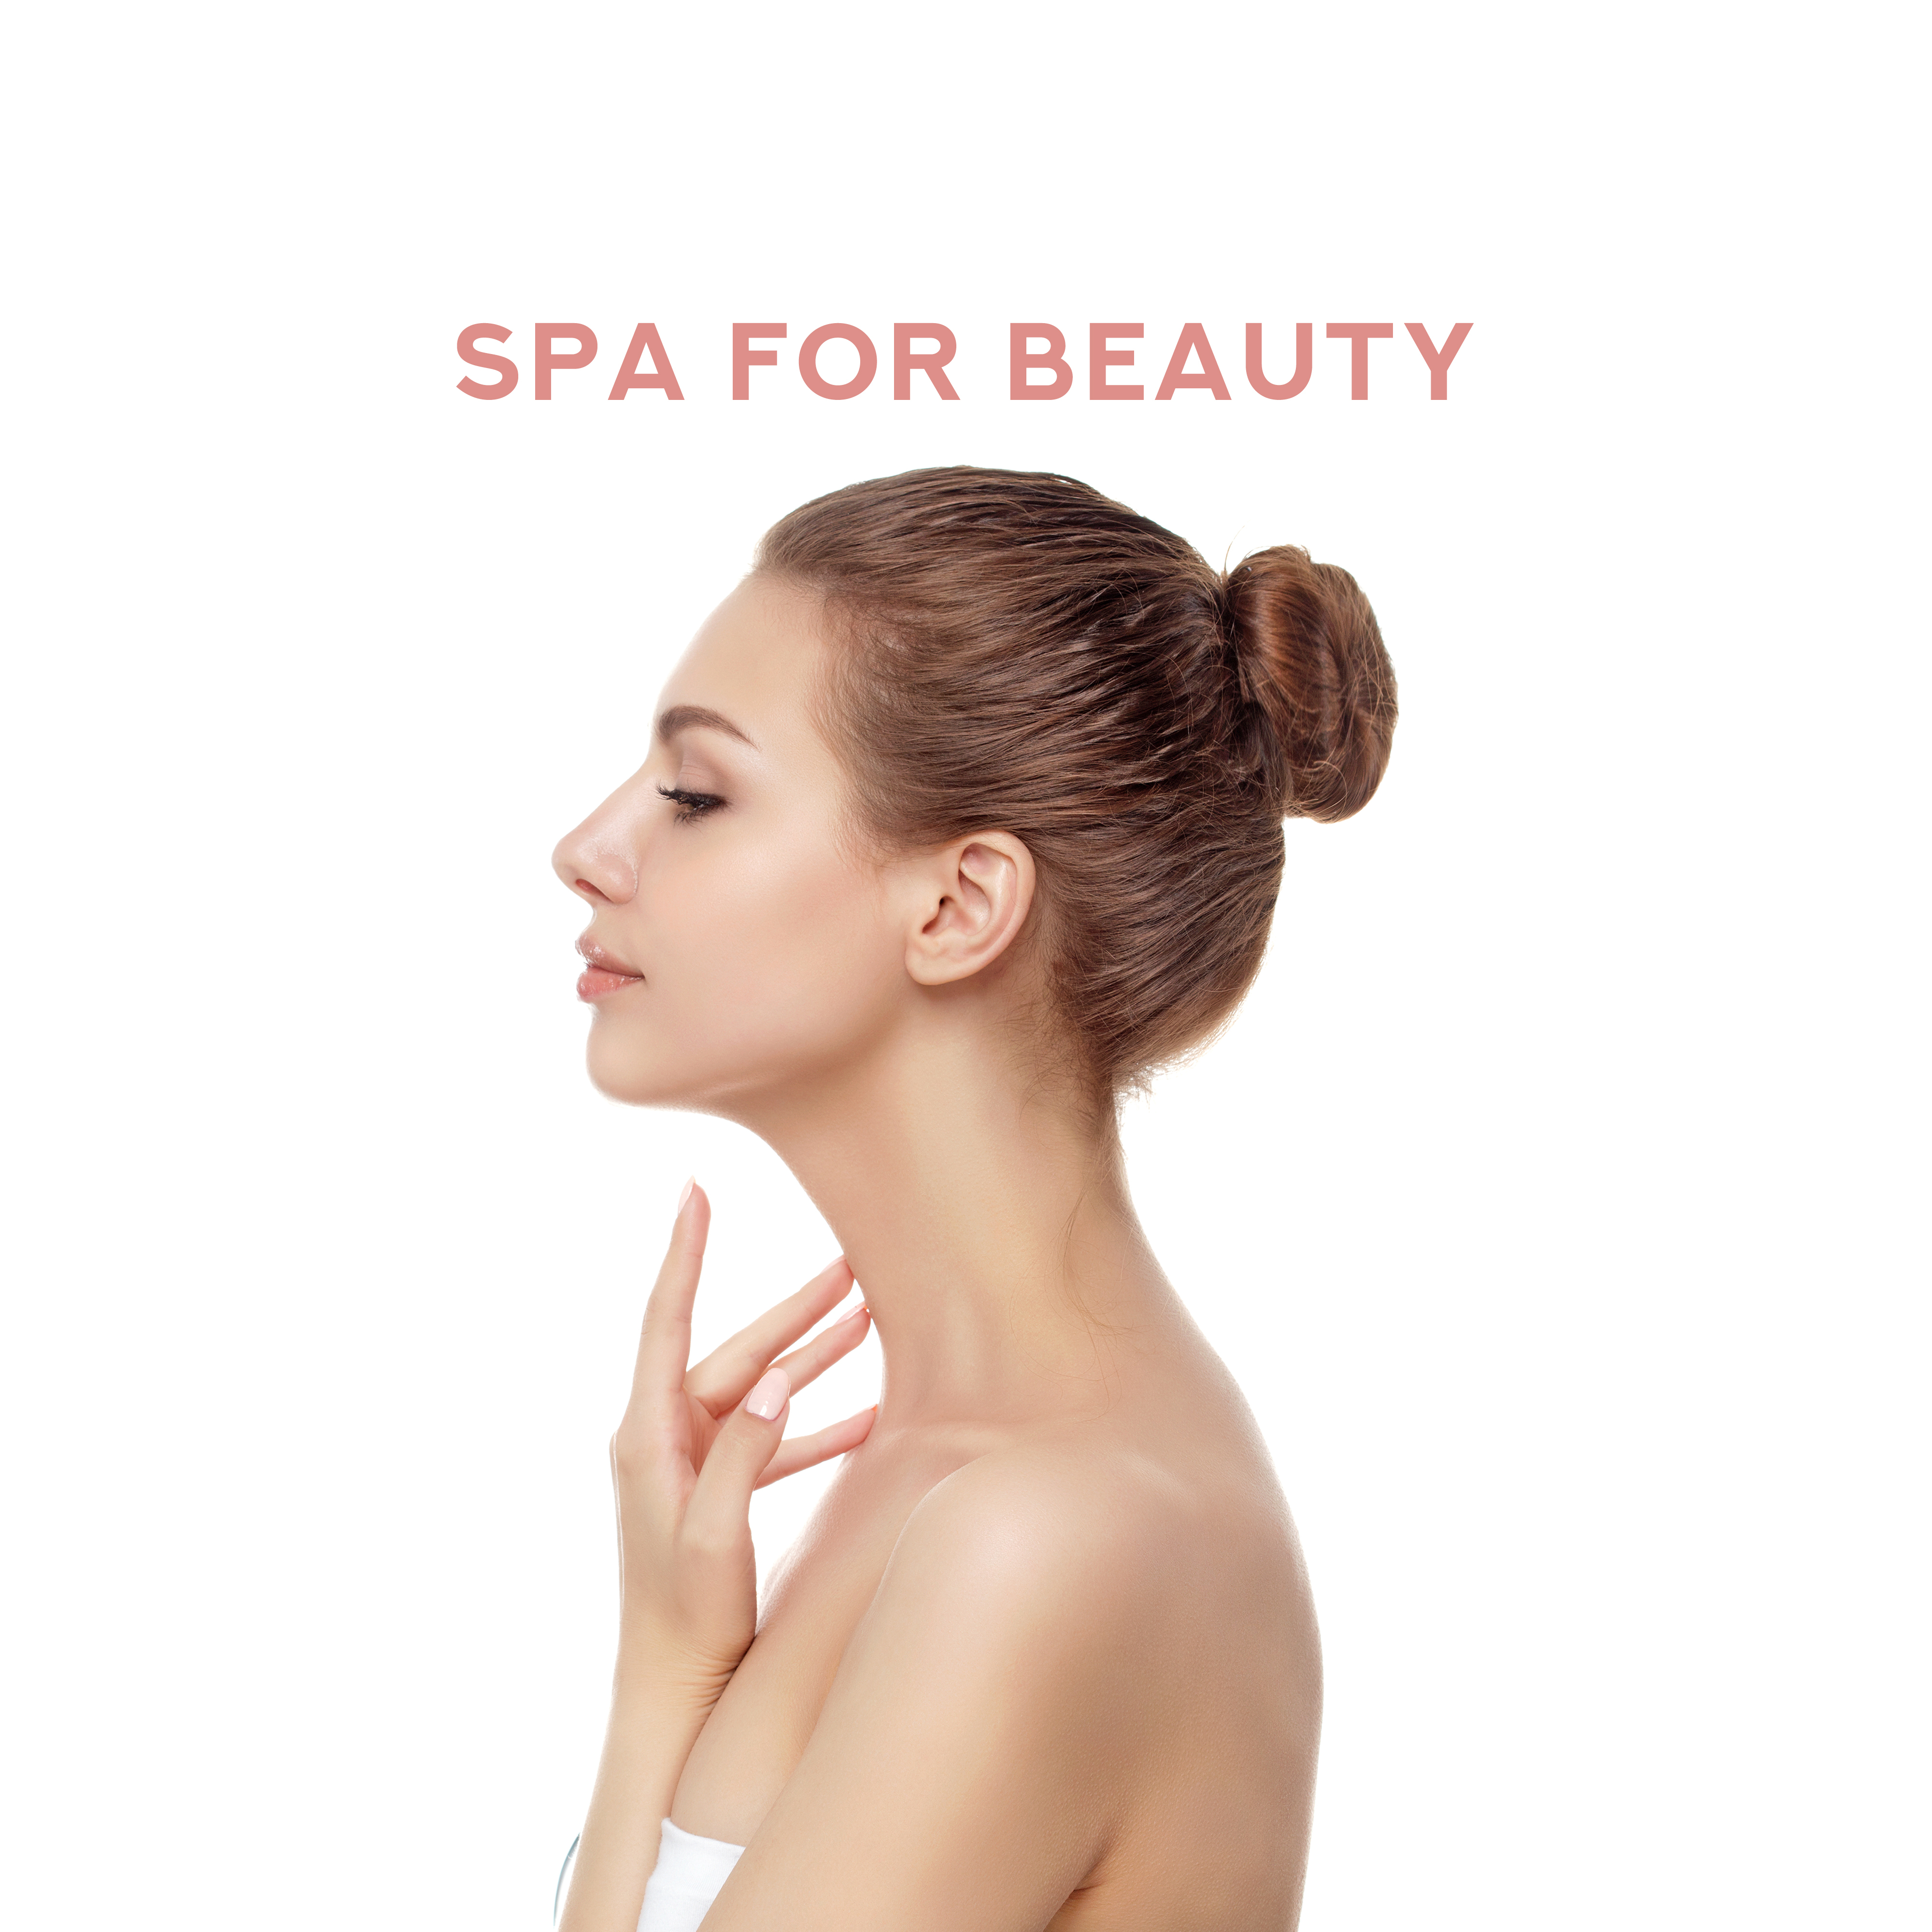 Spa for Beauty: Relaxing Ambient Melodies with the Background of Nature and Singing of Birds for Spa, Massage, Relaxation, Rest, Sleep and Beauty Treatments